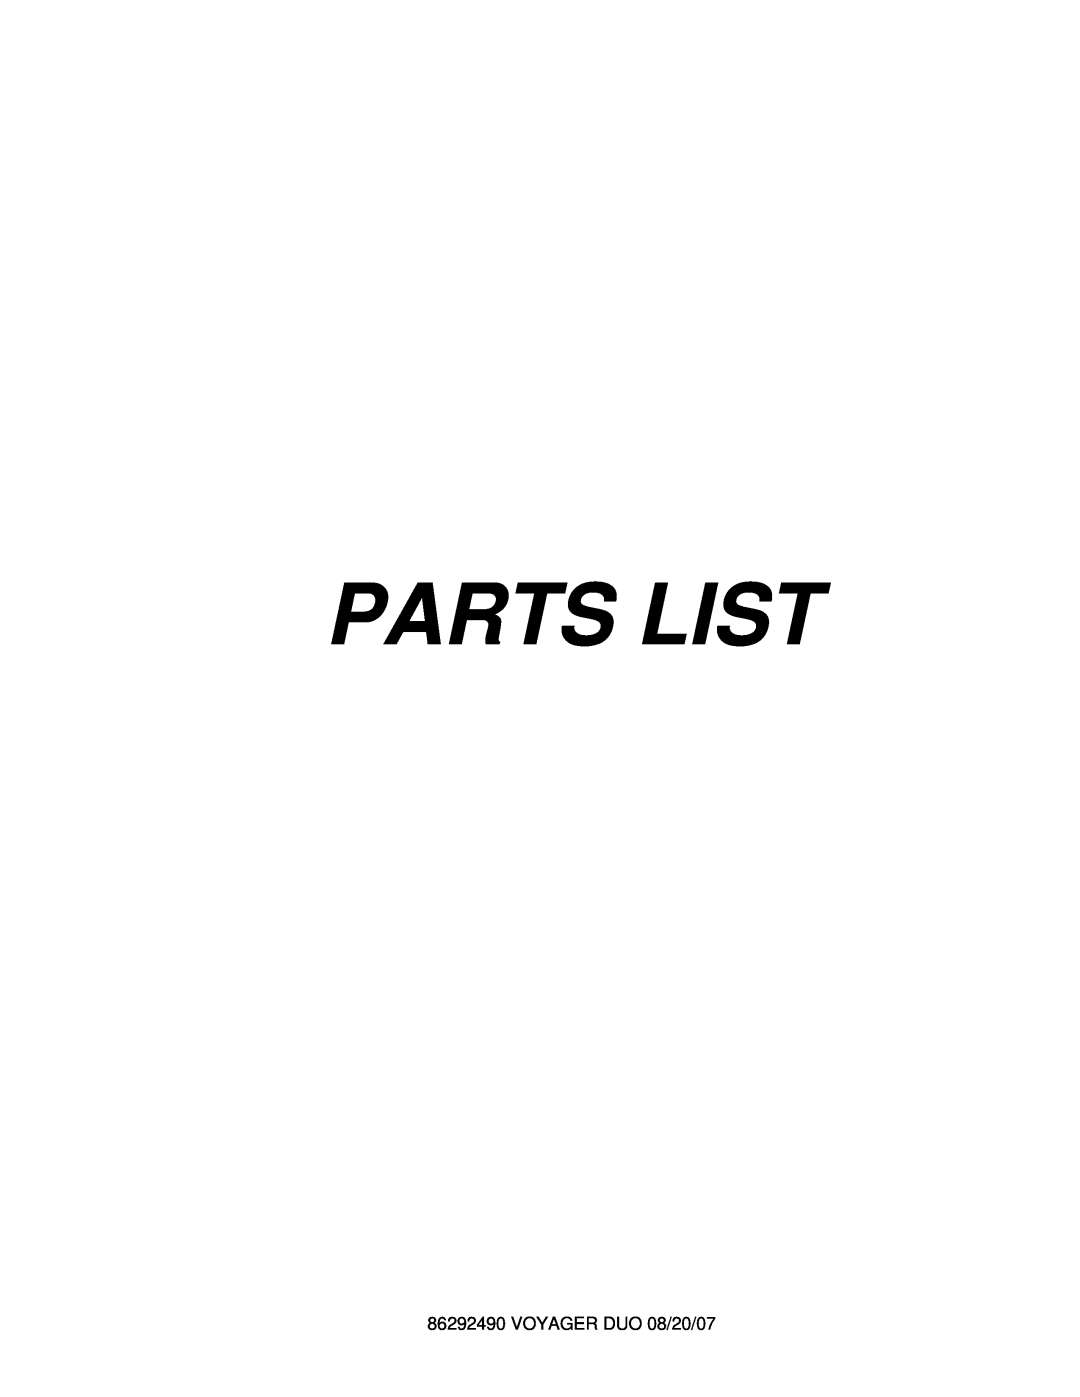 Windsor 10086150, 10086130 manual Parts List, VOYAGER DUO 08/20/07 